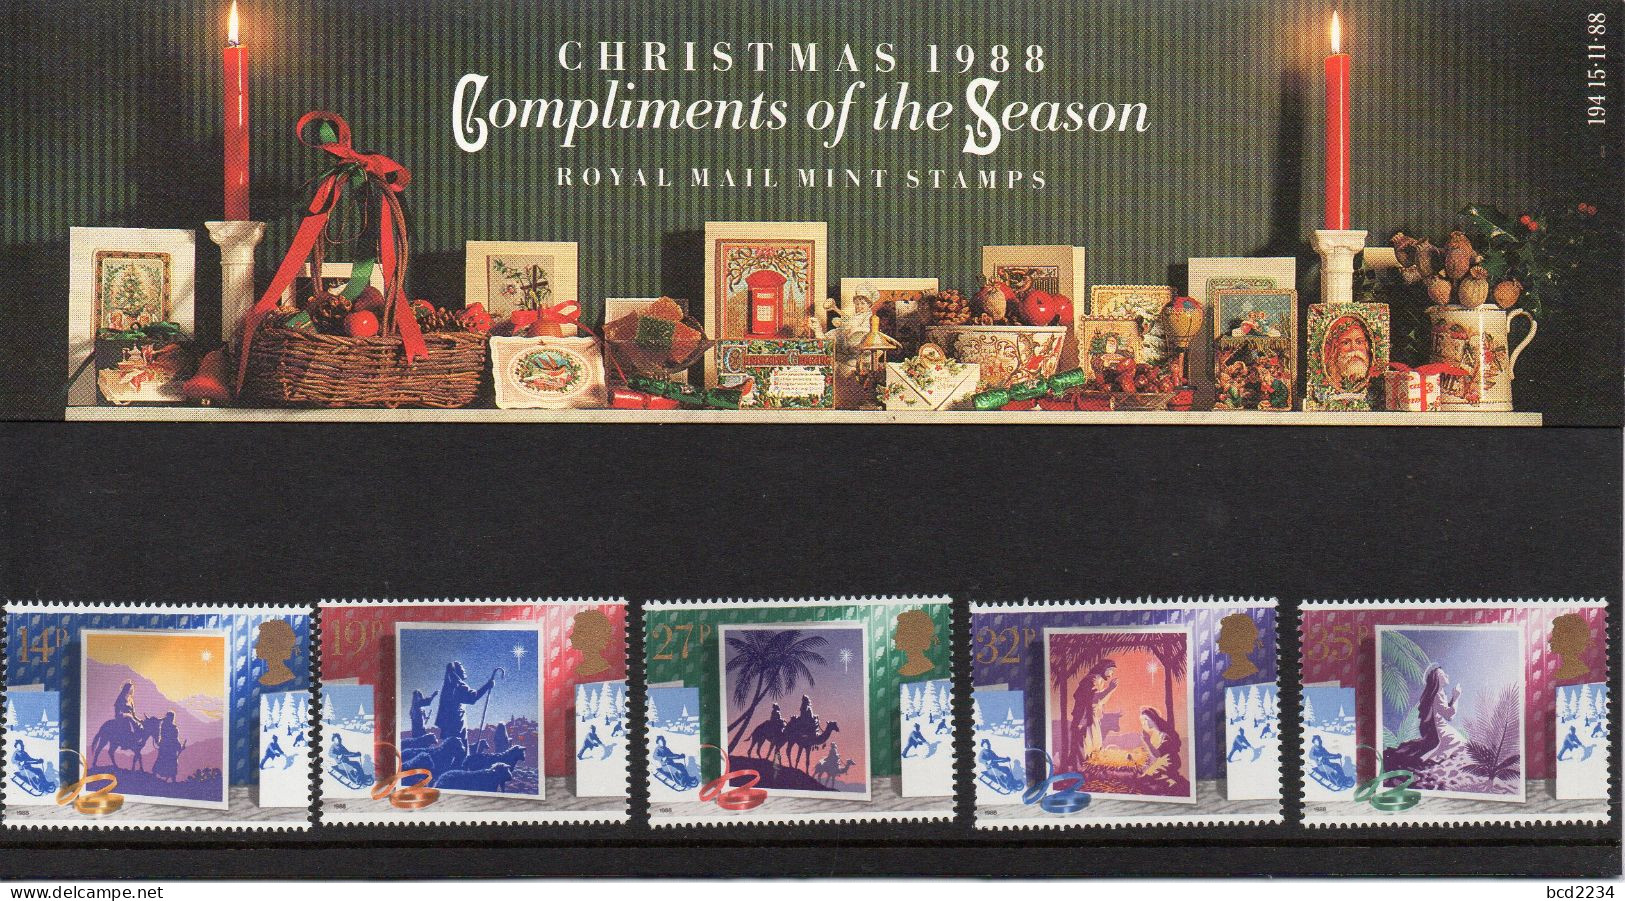 GB GREAT BRITAIN 1988 CHRISTMAS XMAS COMPLIMENTS OF THE SEASON PRESENTATION PACK No 194 +ALL INSERTS - Presentation Packs